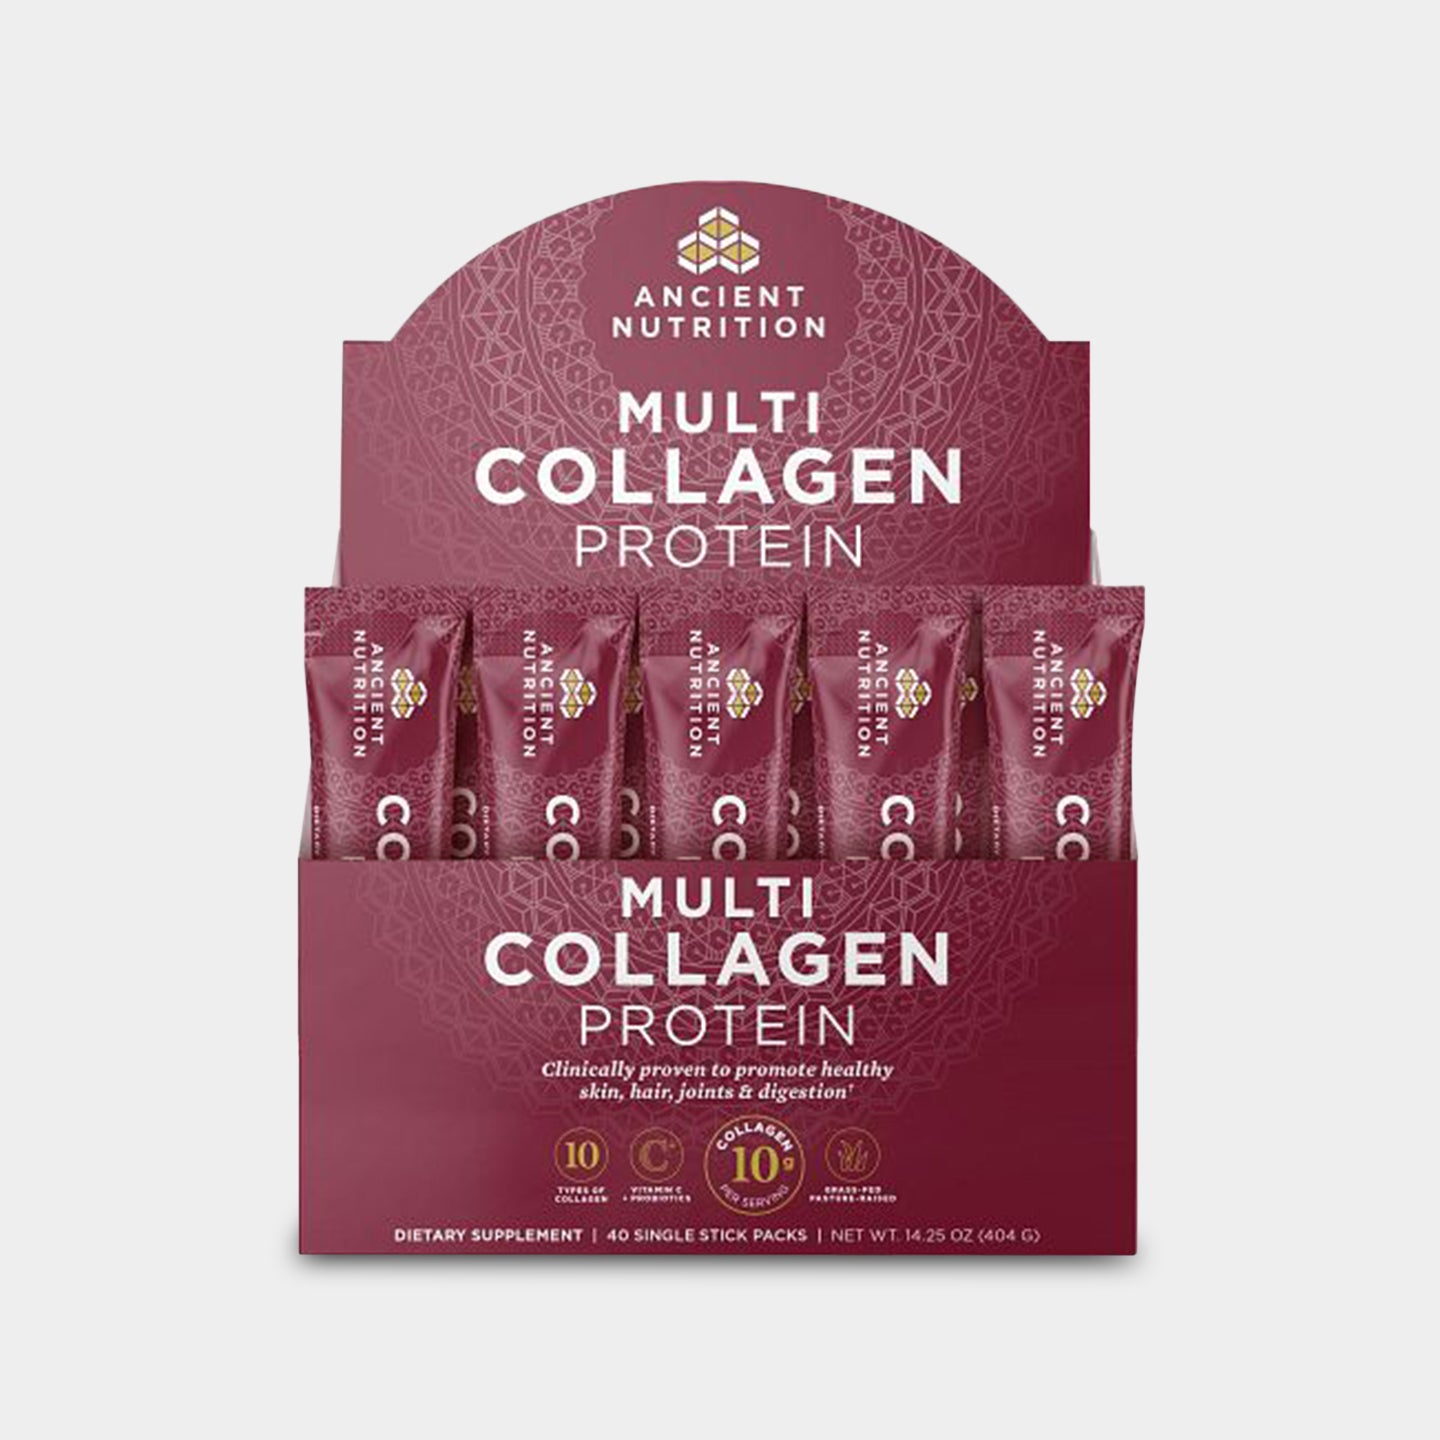 Ancient Nutrition Multi Collagen Protein - 20g, Pure, 40 Single Serv Packets A1